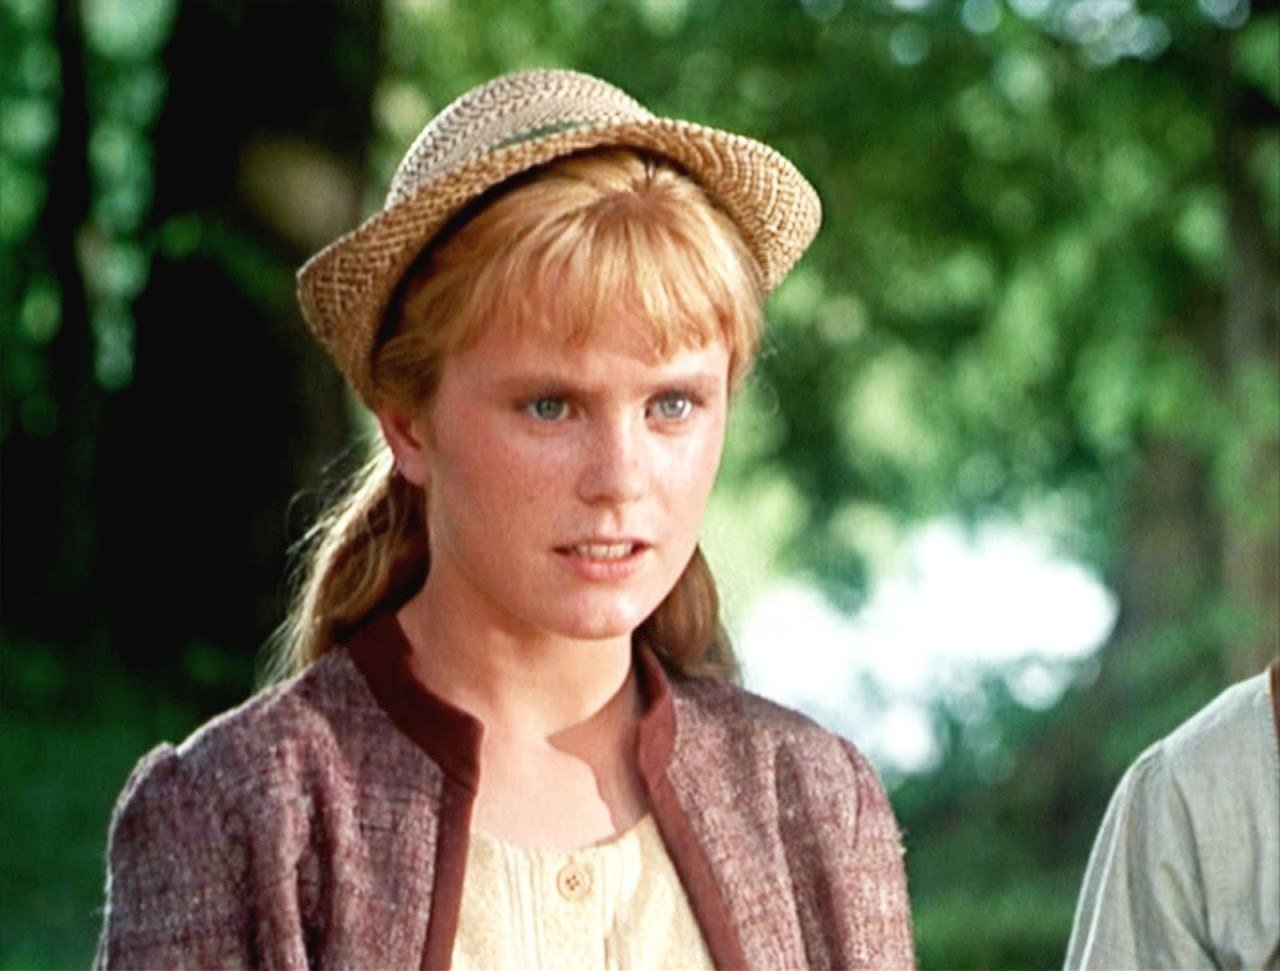 Happy Birthday to Heather Menzies-Urich, here in THE SOUND OF MUSIC! 